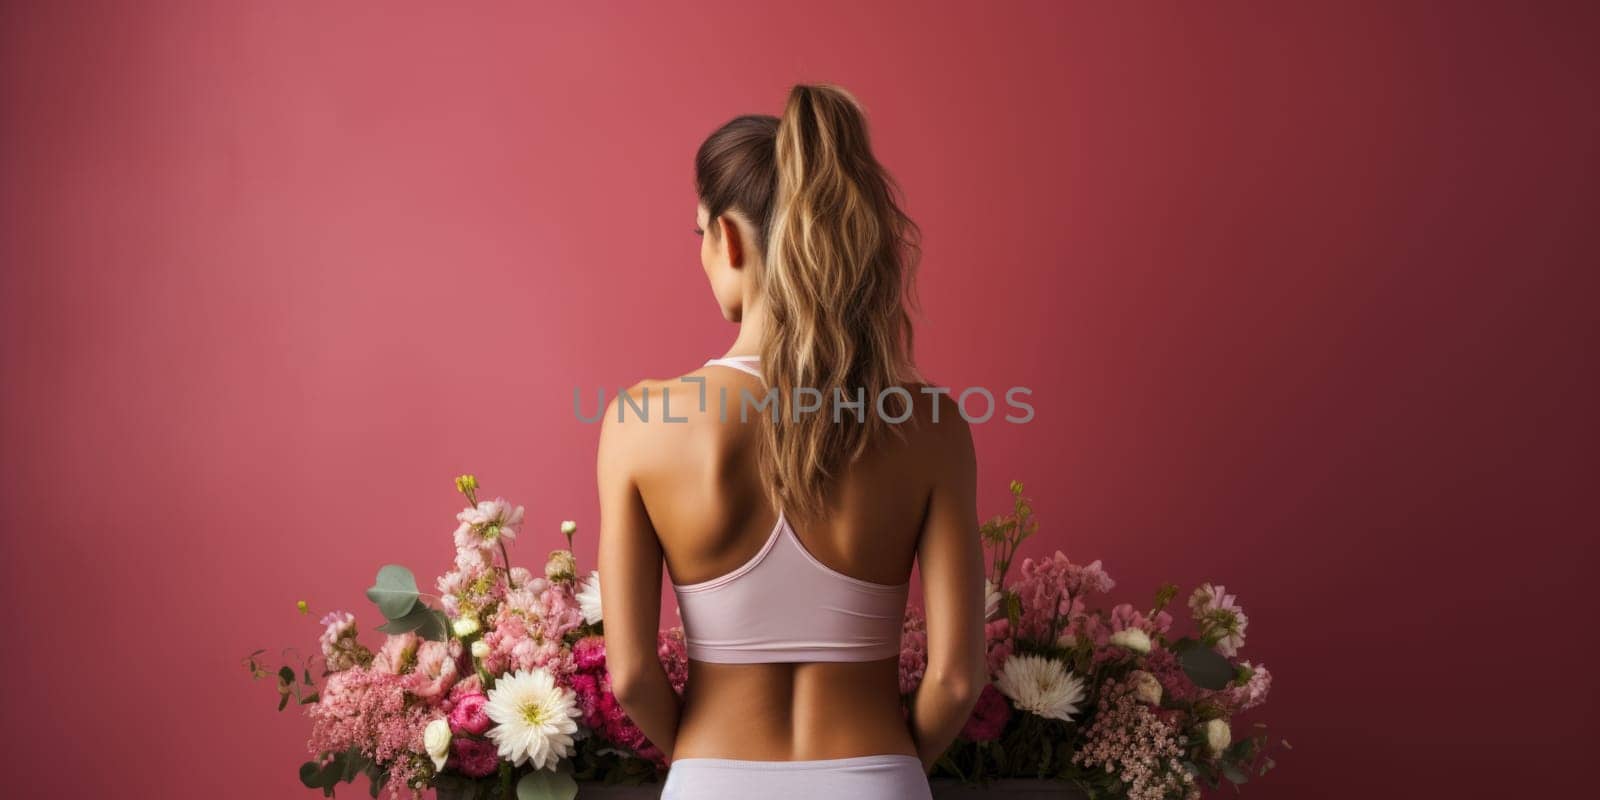 A stylish woman standing elegantly next to a vase filled with colorful flowers.